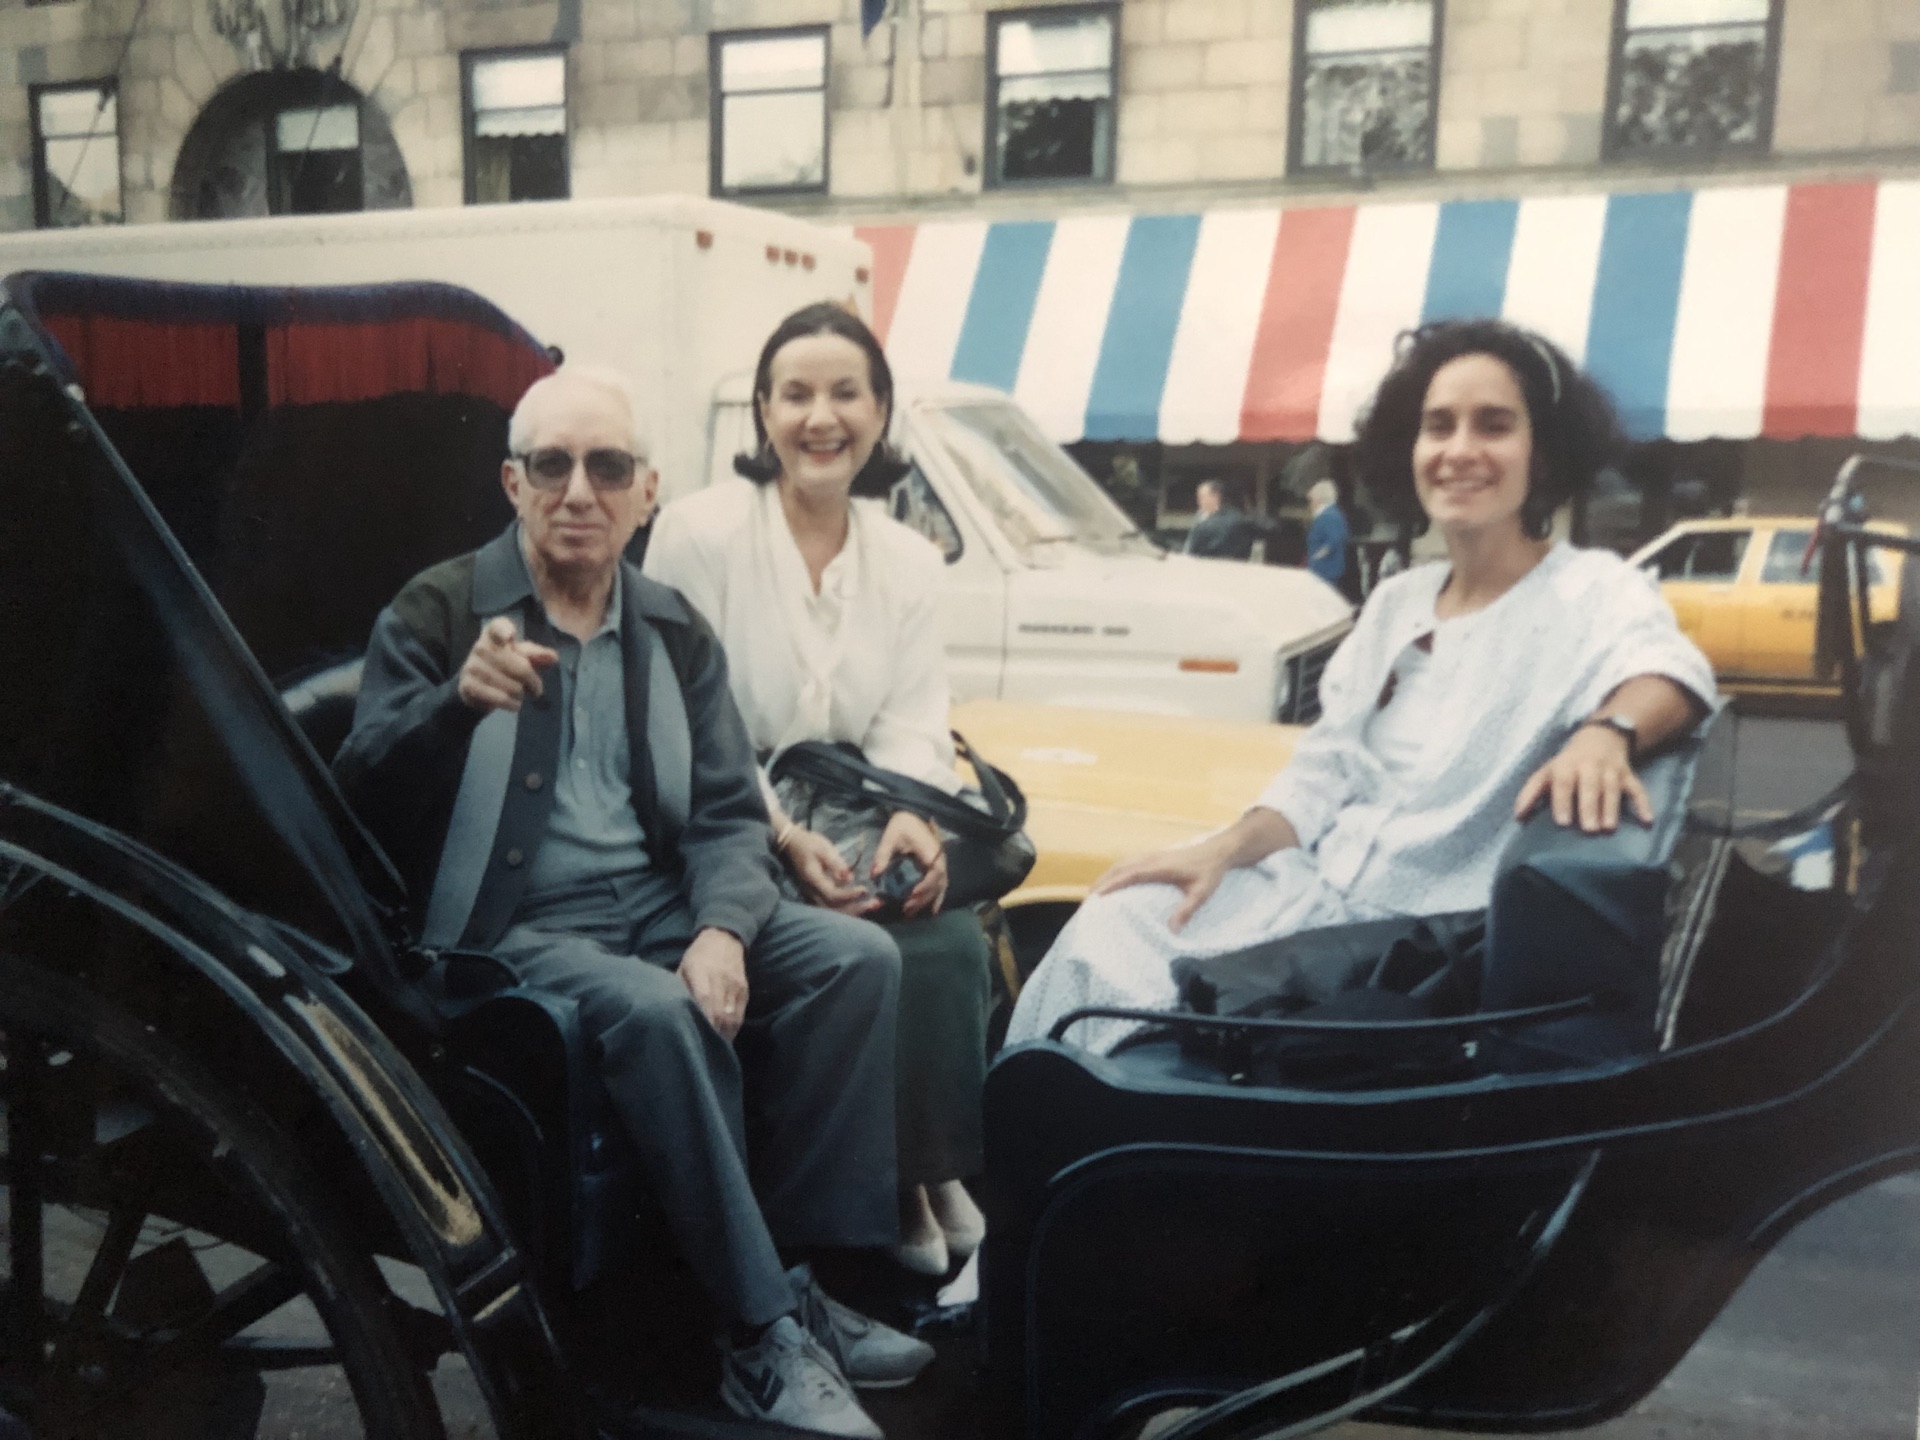 Cheryl Qamar with her parents during their “first out visit”, New York, NY, 1989. She explains, “I had come out when I lived in Boston in 1973, but it wasn’t until I moved to Woodstock, NY in 1989 that my parents finally agreed to meet me and my partner at the time. This is the only photo of us from that seminal trip. They agreed to visit me again in Saugerties, NY in 1993 after I bought my first home with my current wife, but my father died 2 months before.” Photo courtesy of Cheryl Qamar.